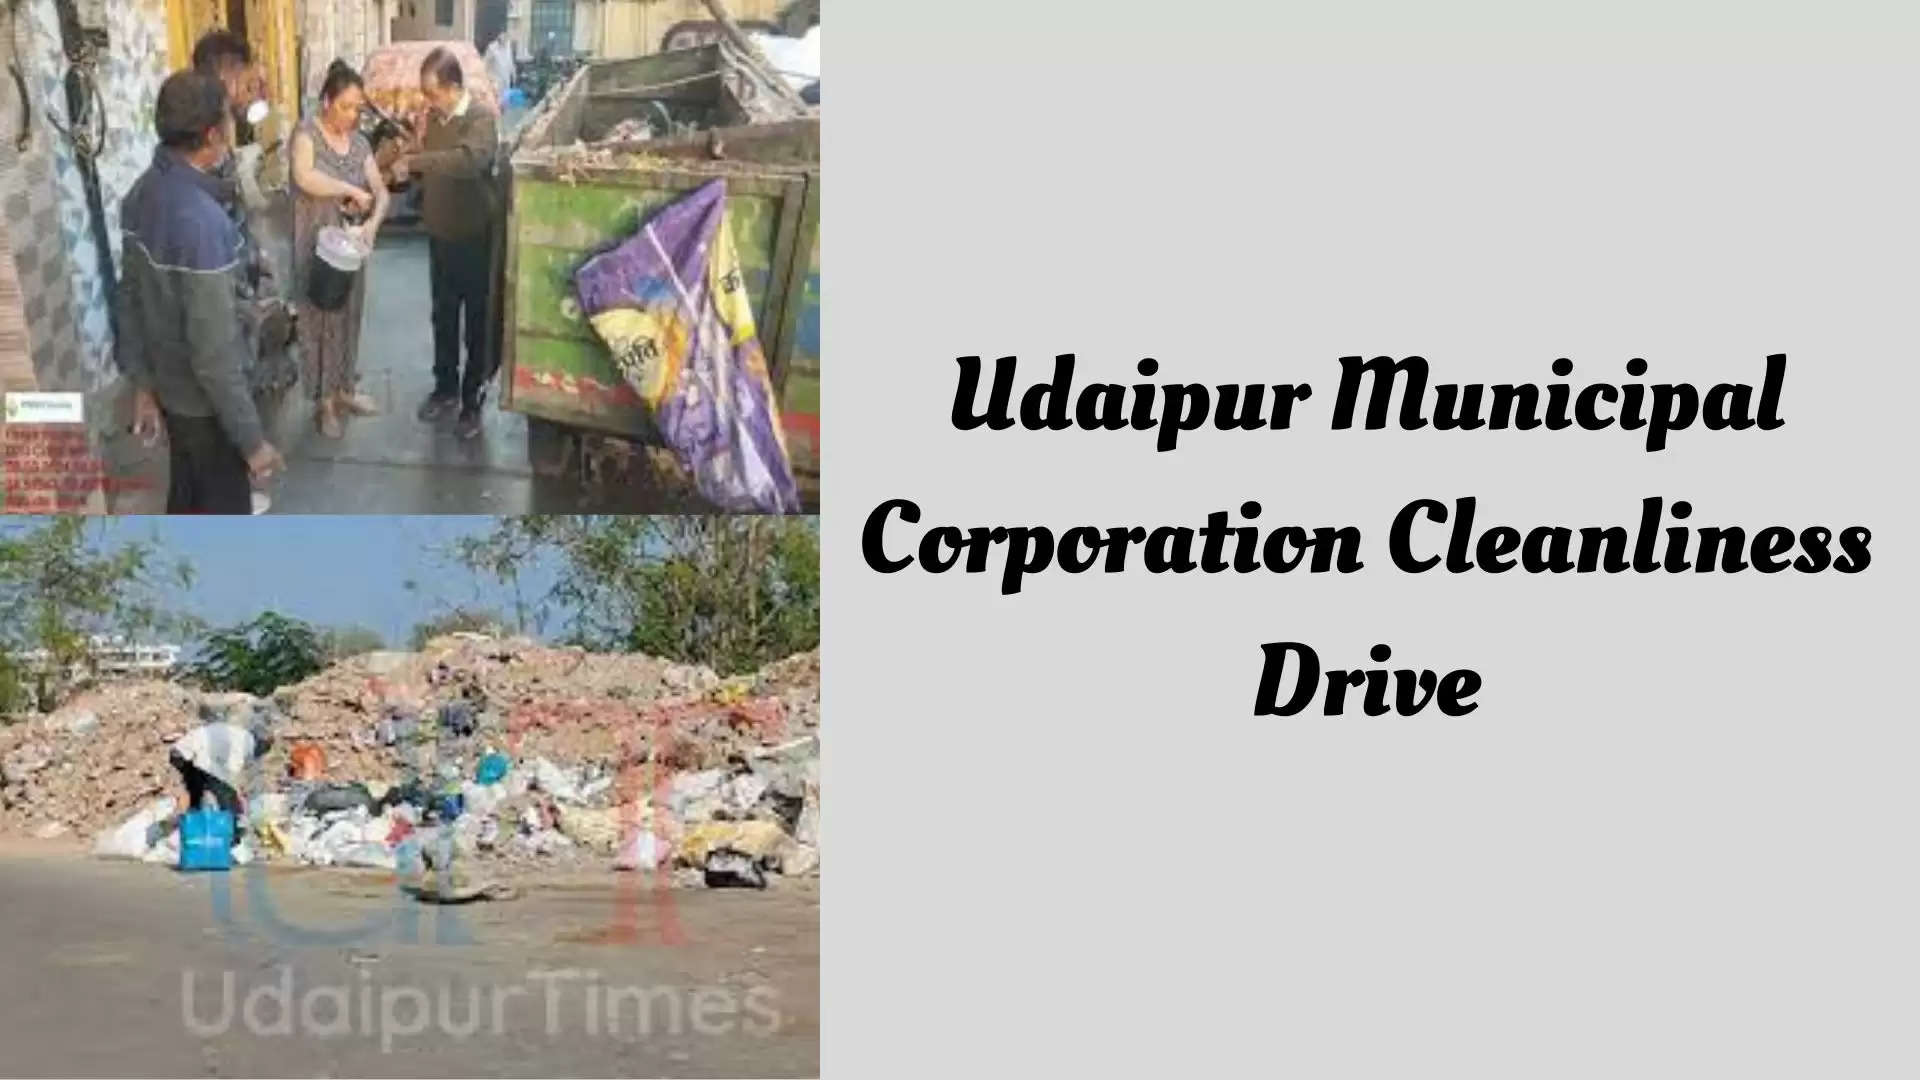 Udaipur Municipal Corporation Cleanliness Drive